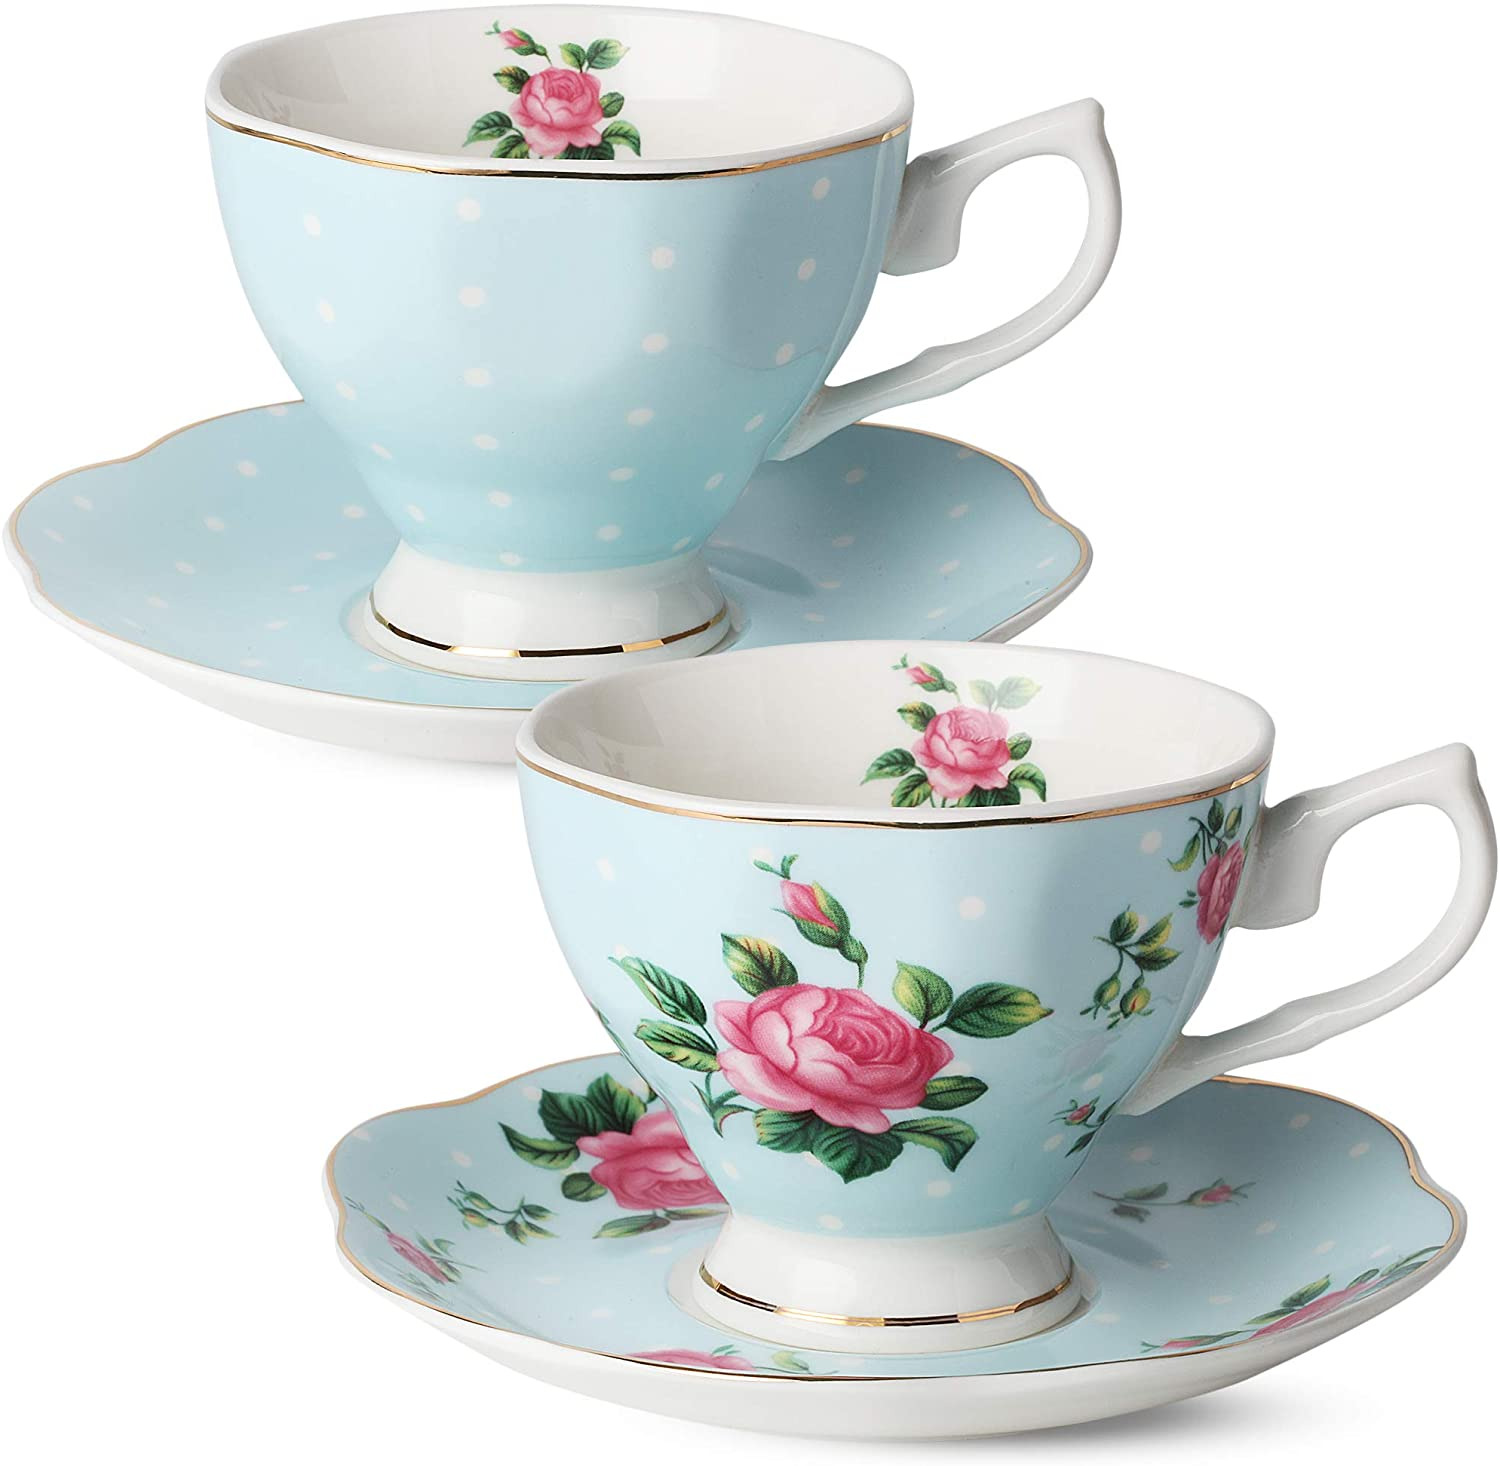 Floral Tea Cups and Saucers, Set of 2, 8oz with Gold Trim